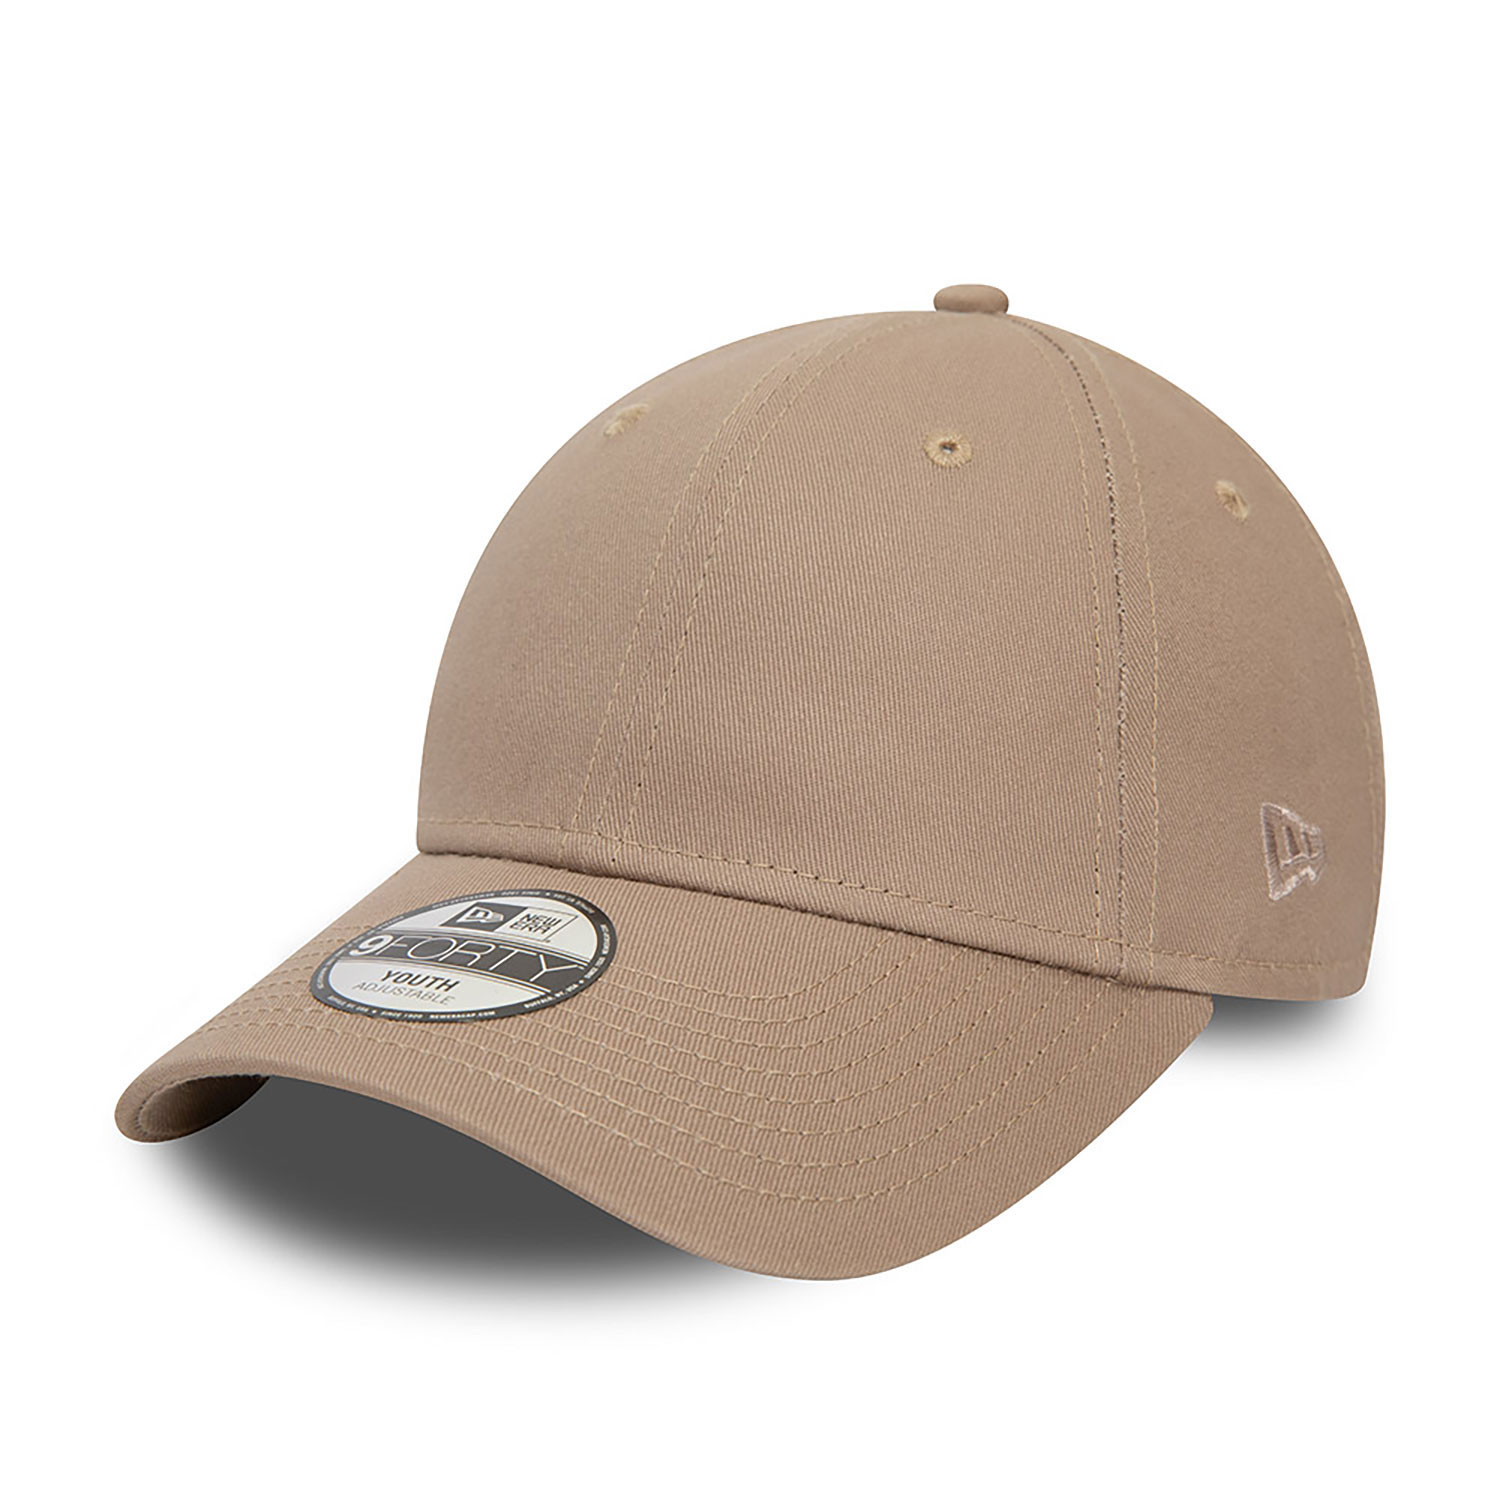 New Era Youth Essential Brown 9FORTY Adjustable Cap